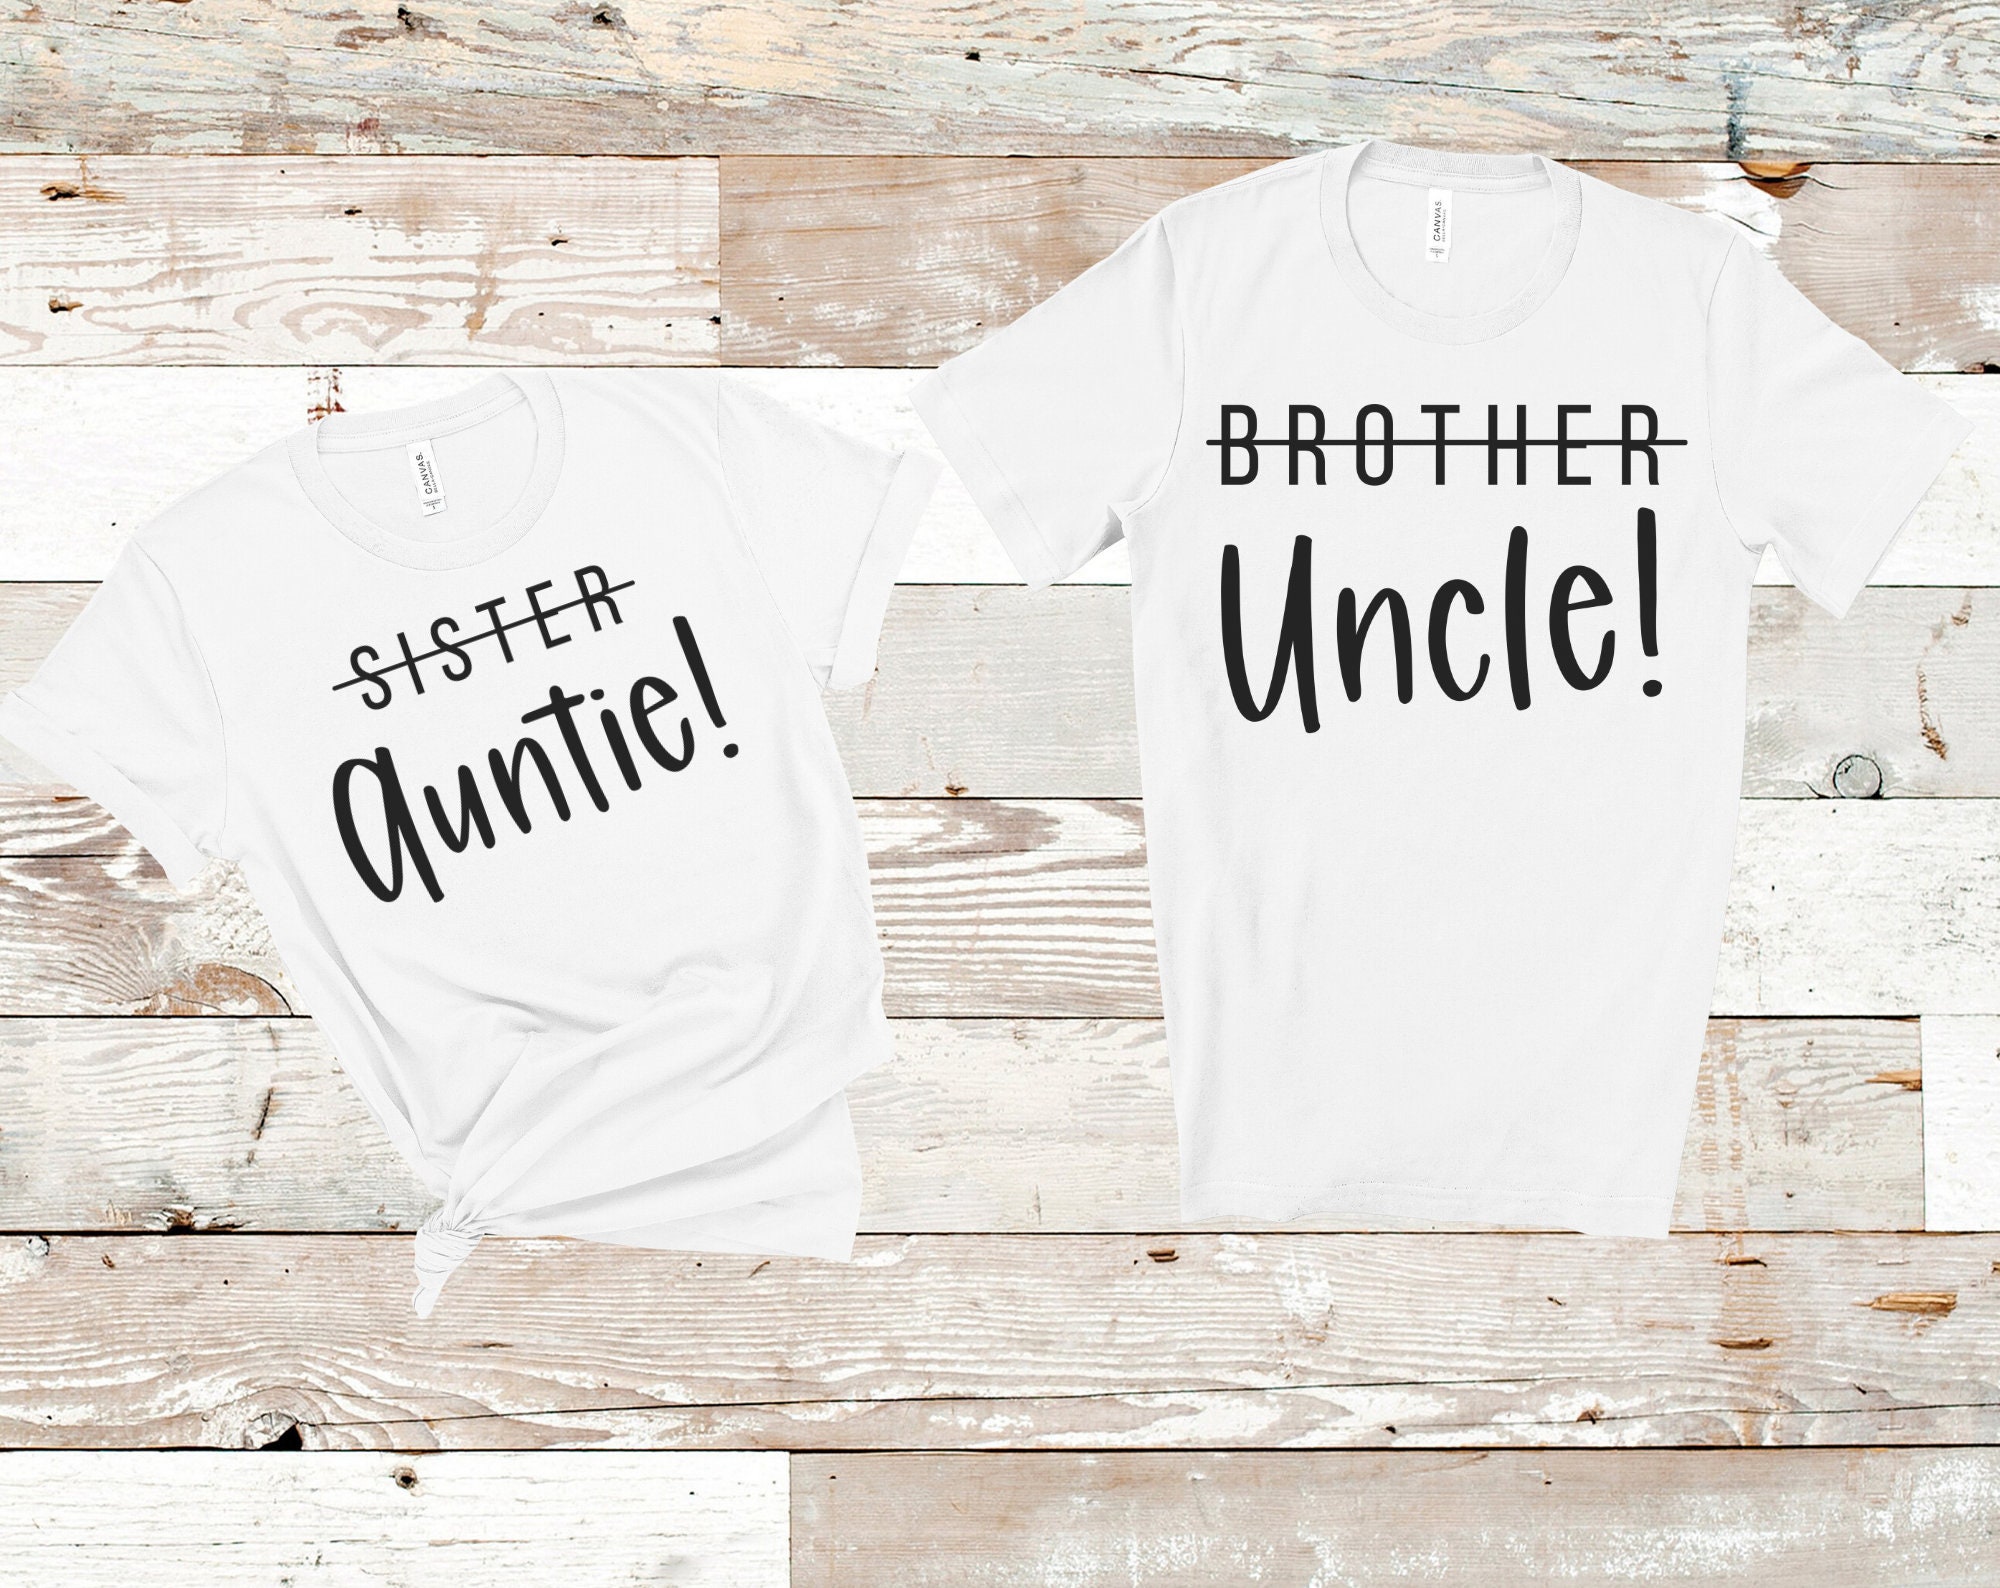 Brother To Uncle Shirt, Sister Aunt Promoted Uncle, Aunt, Est 2020 2020, Gifts Reveal